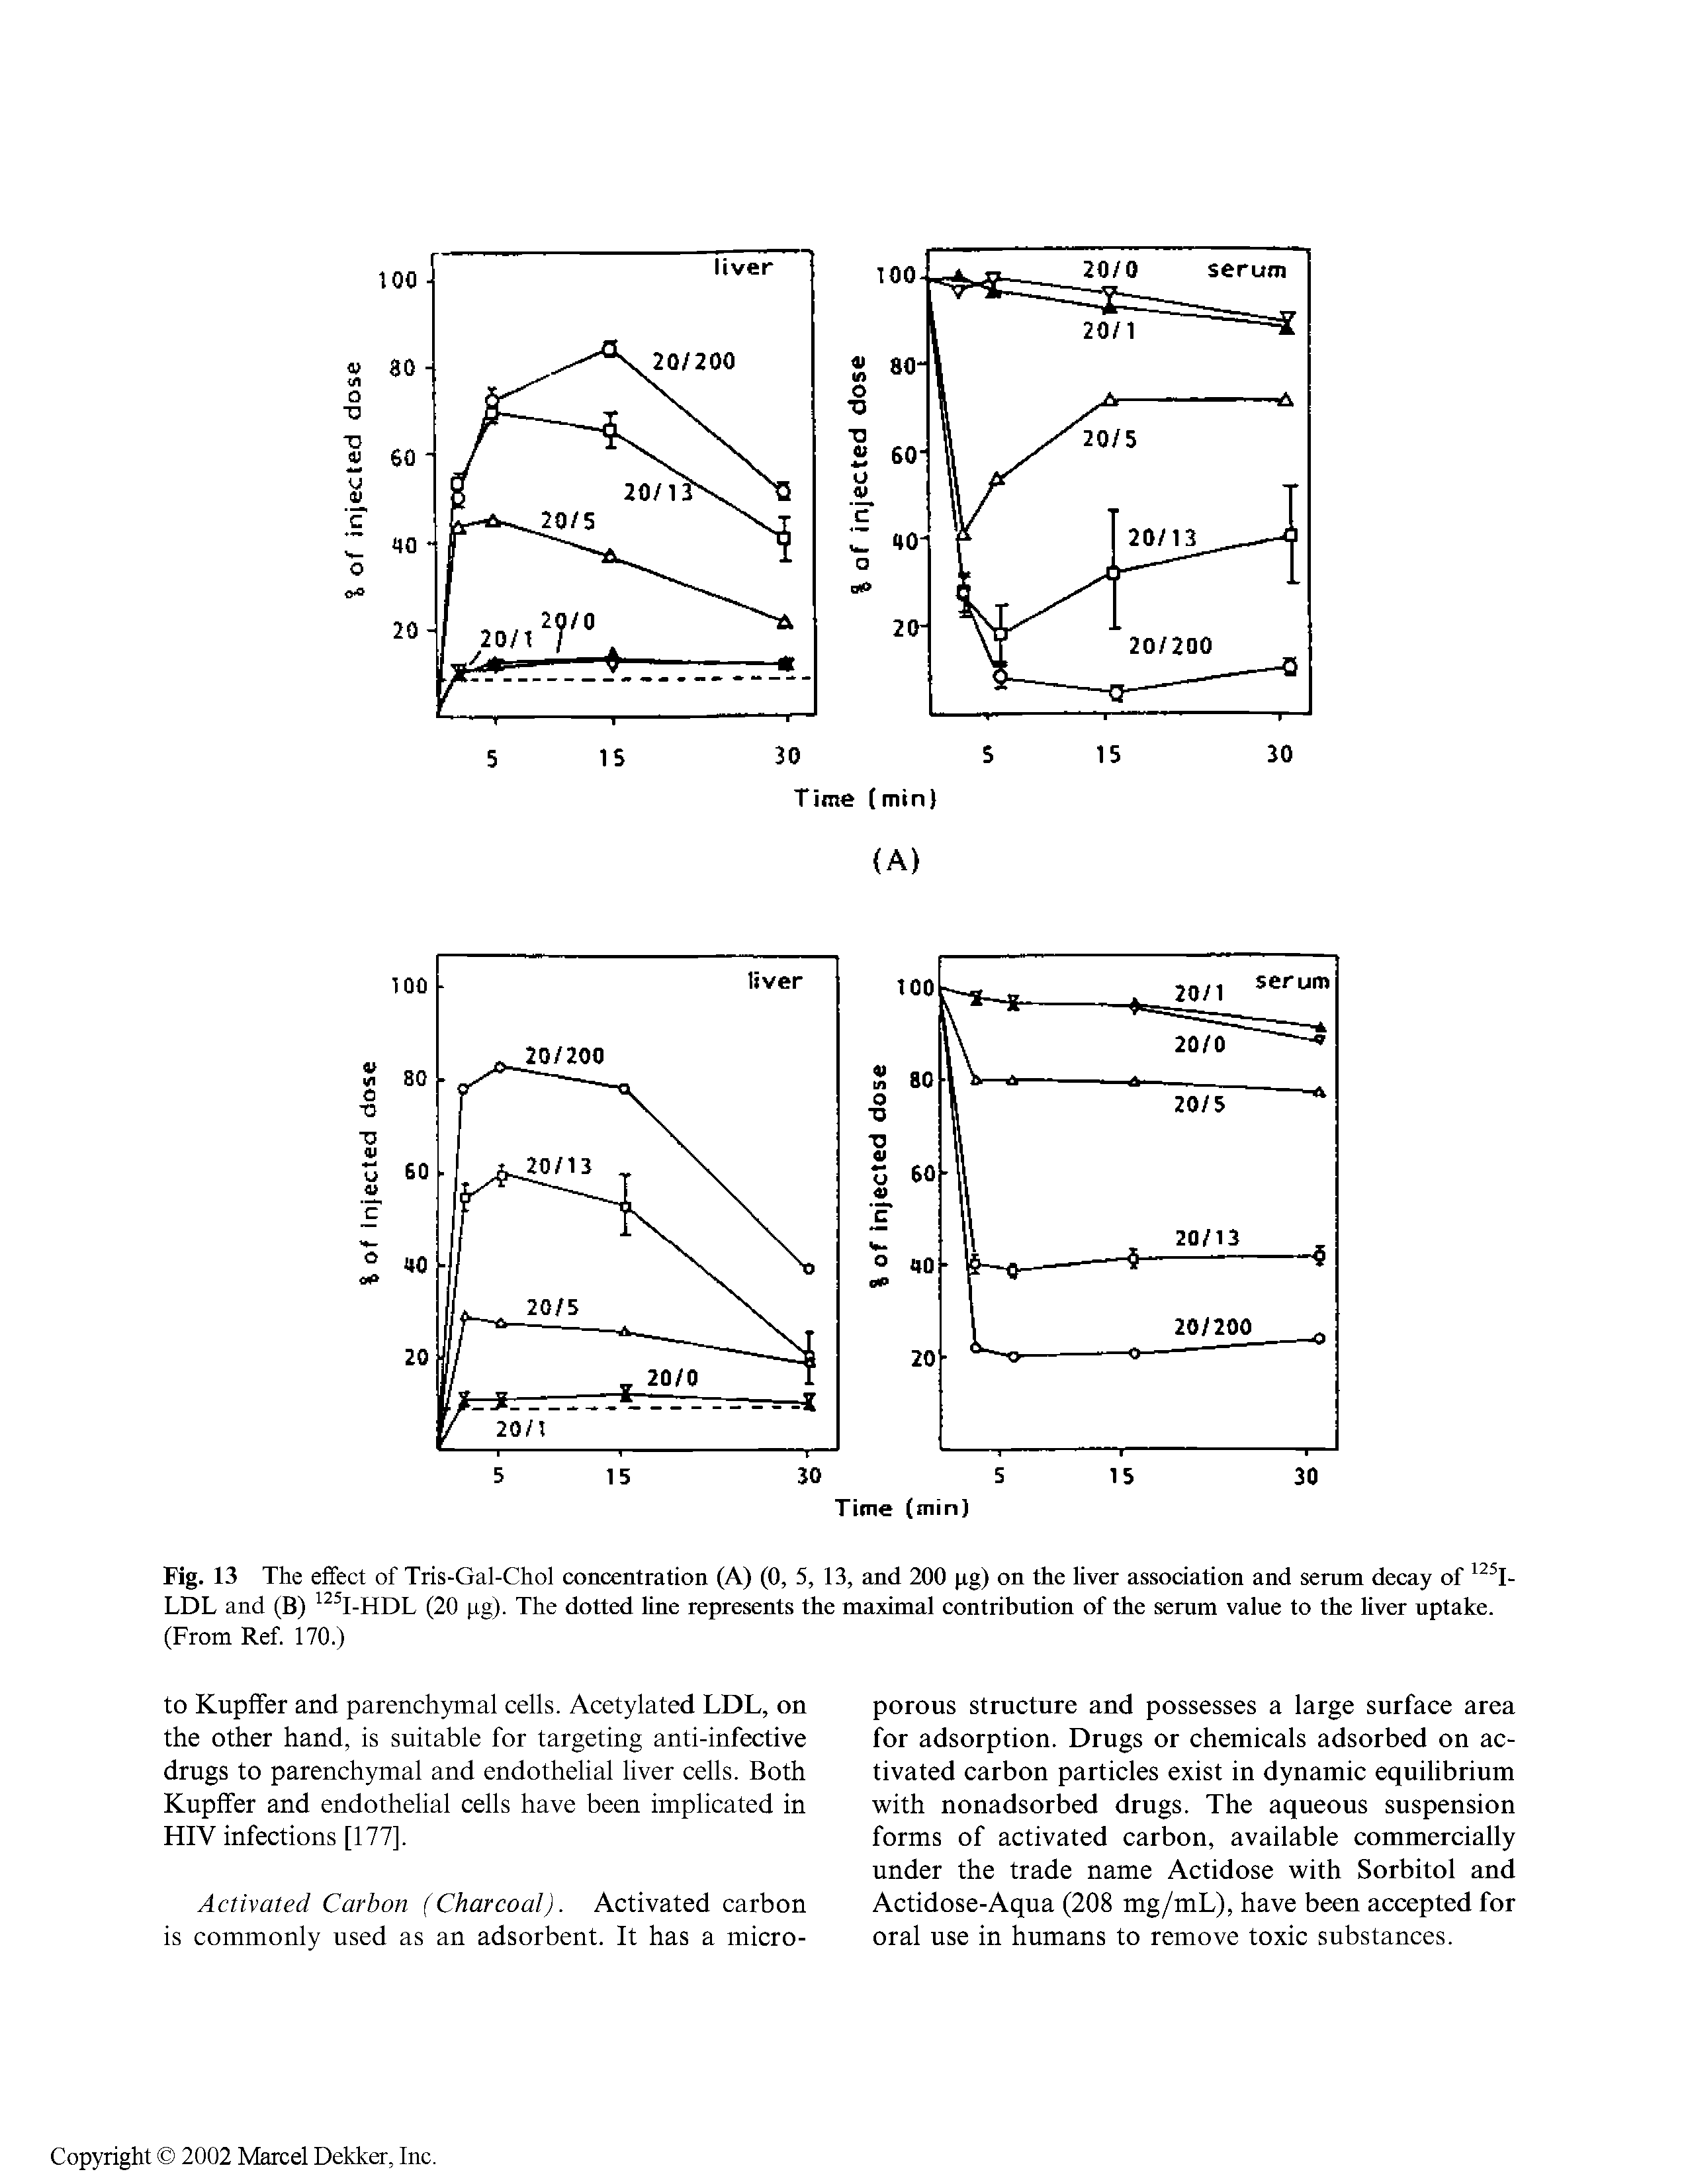 Fig. 13 The effect of Tris-Gal-Chol concentration (A) (0, 5, 13, and 200 jig) on the liver association and serum decay of 125I-LDL and (B) 125I-HDL (20 jag). The dotted line represents the maximal contribution of the serum value to the liver uptake. (From Ref. 170.)...